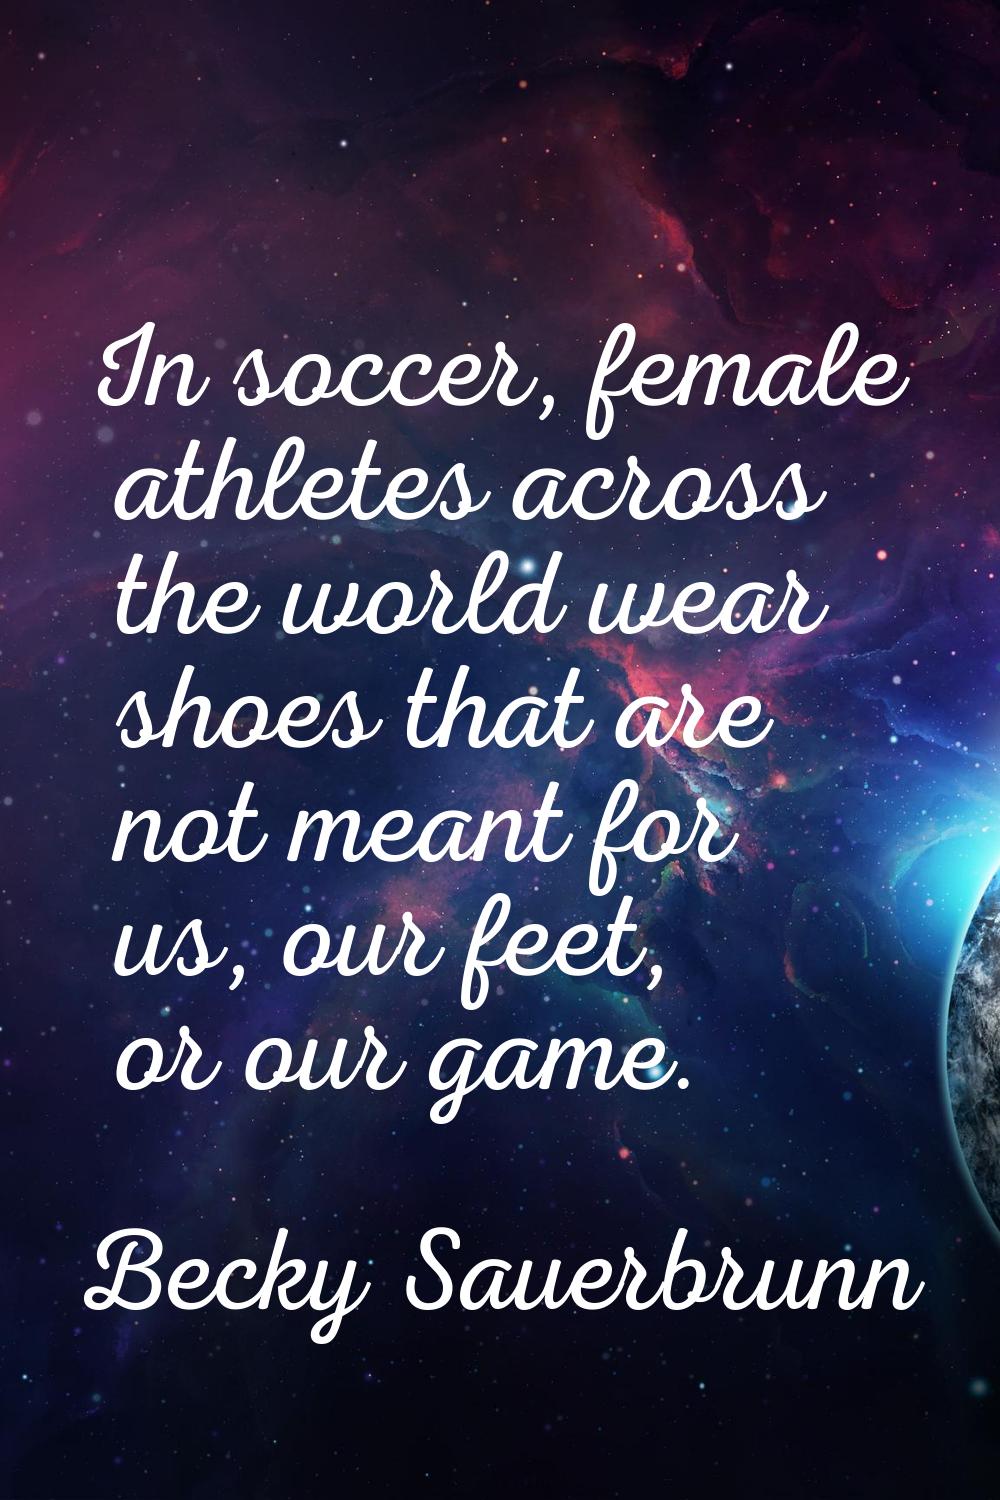 In soccer, female athletes across the world wear shoes that are not meant for us, our feet, or our 